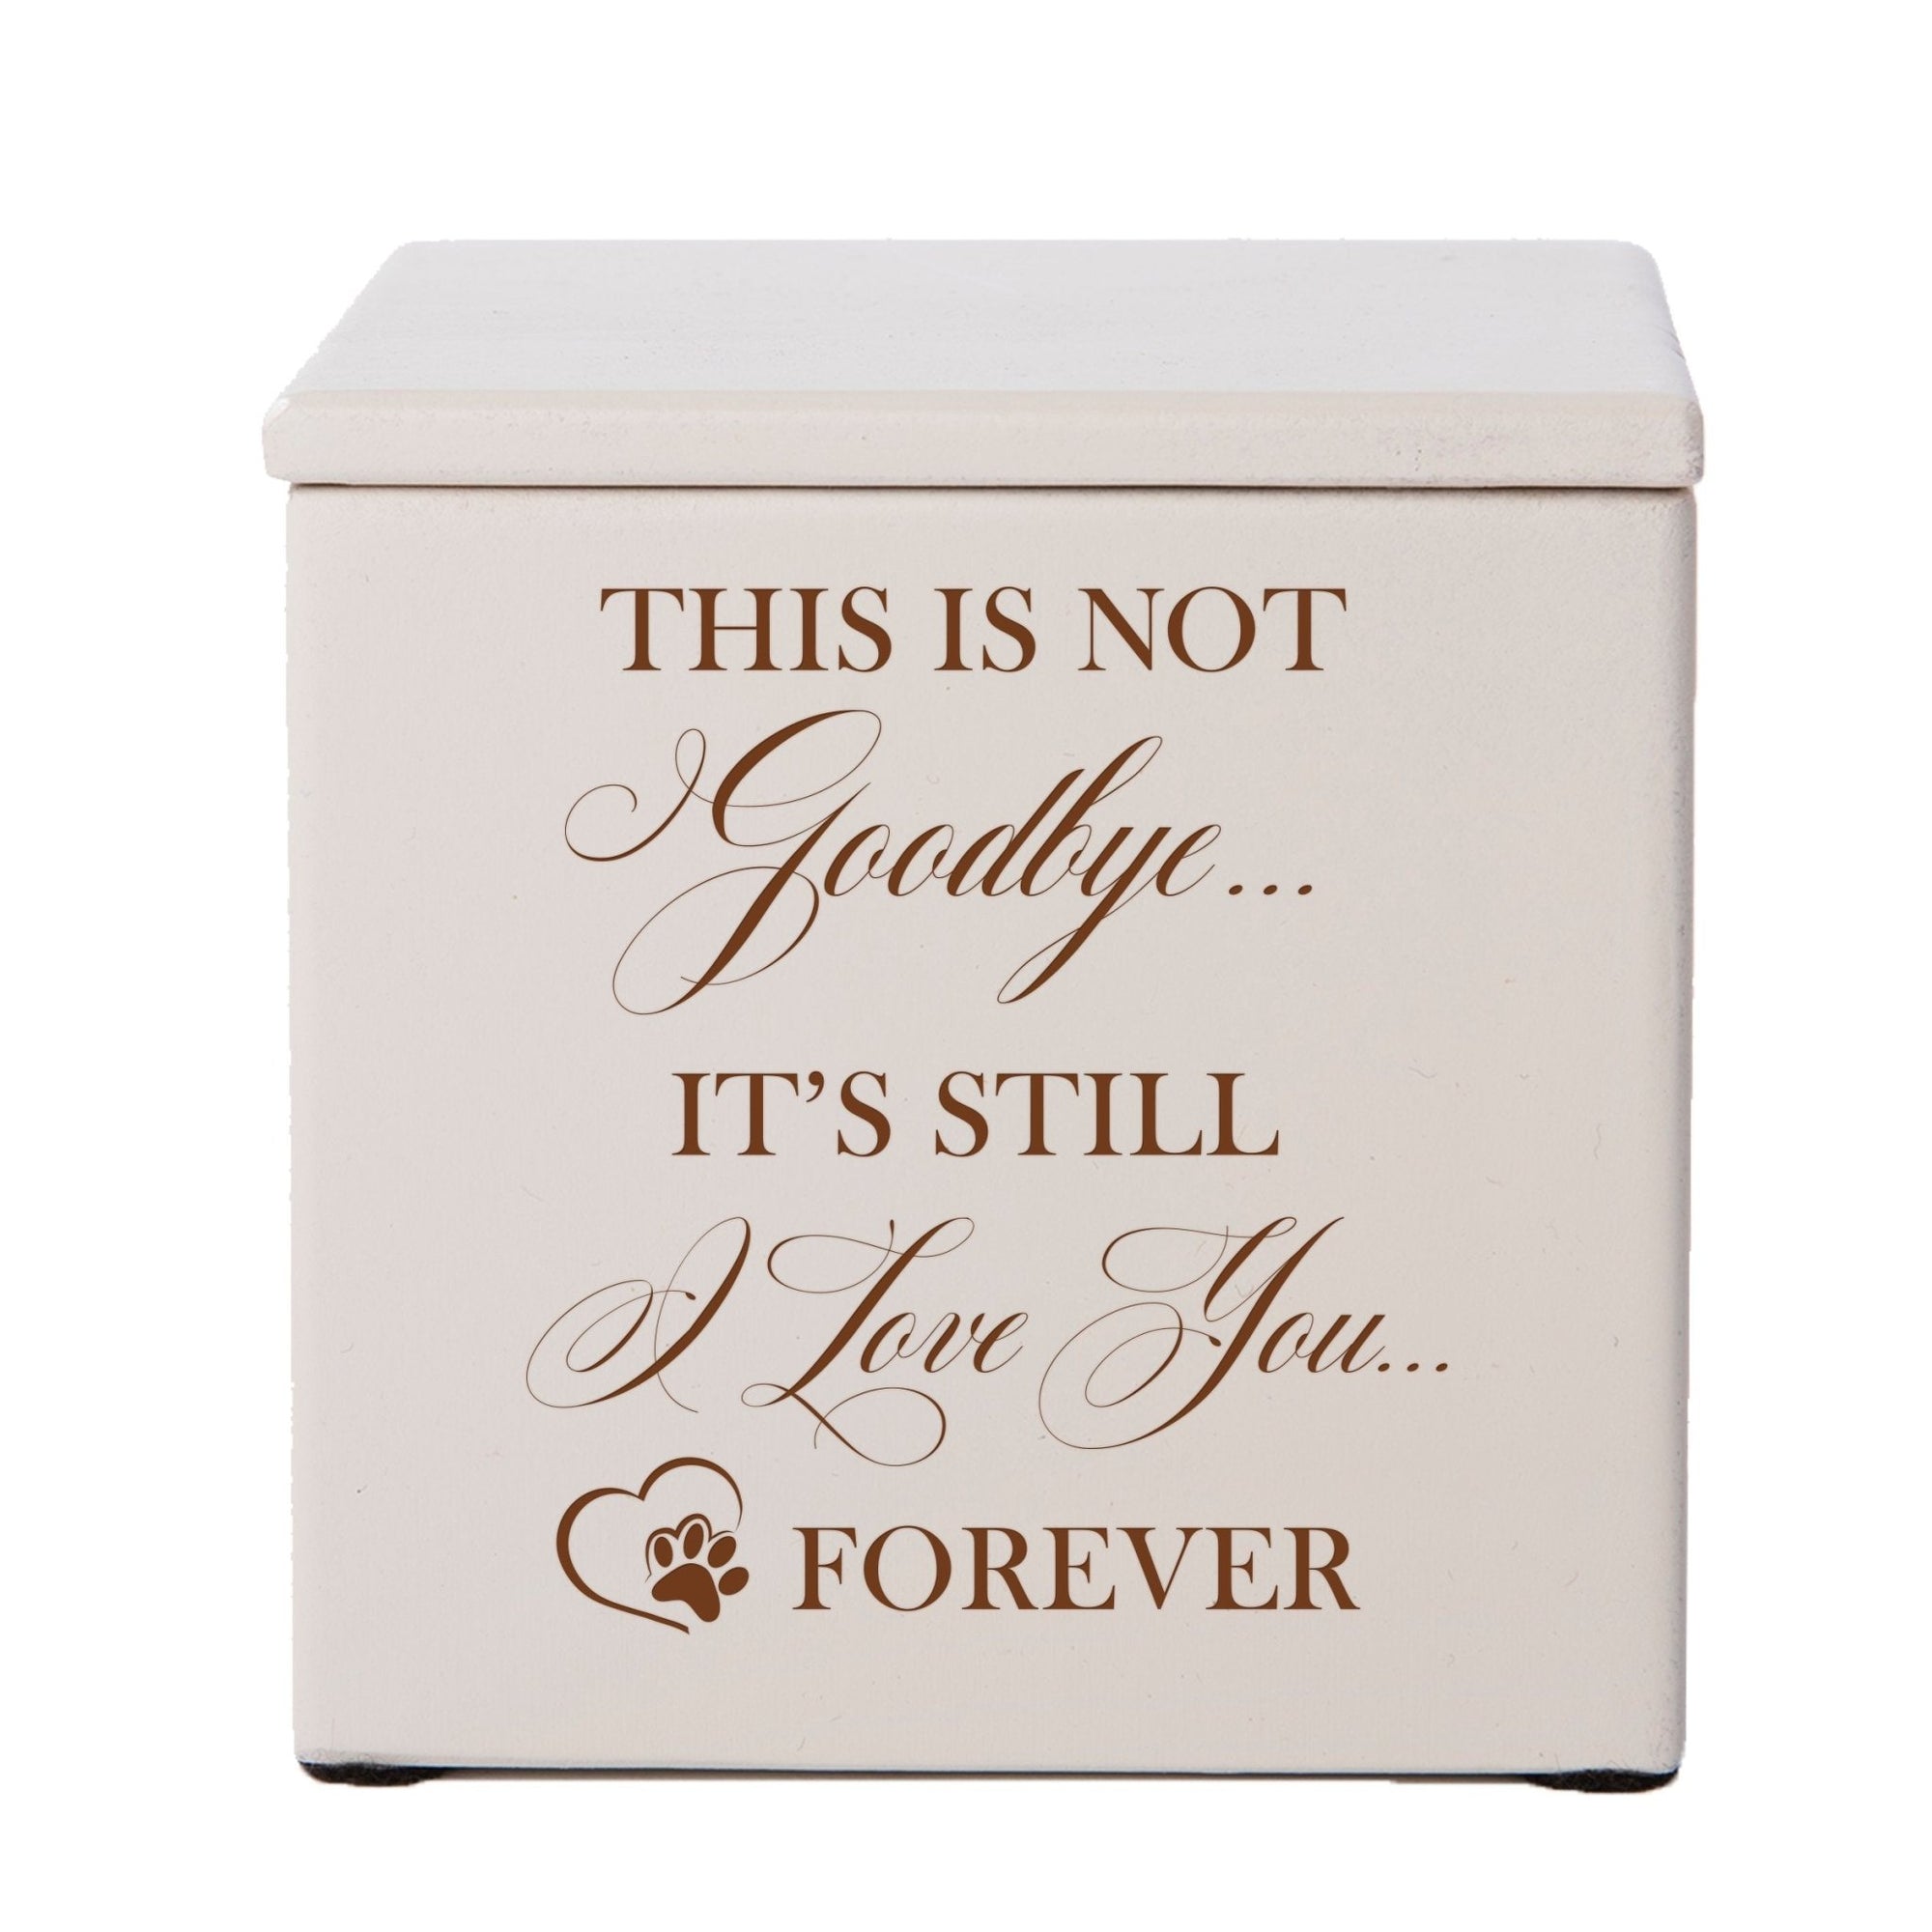 Pet Memorial Keepsake Cremation Urn Box for Dog or Cat - This Is Not Goodbye - LifeSong Milestones